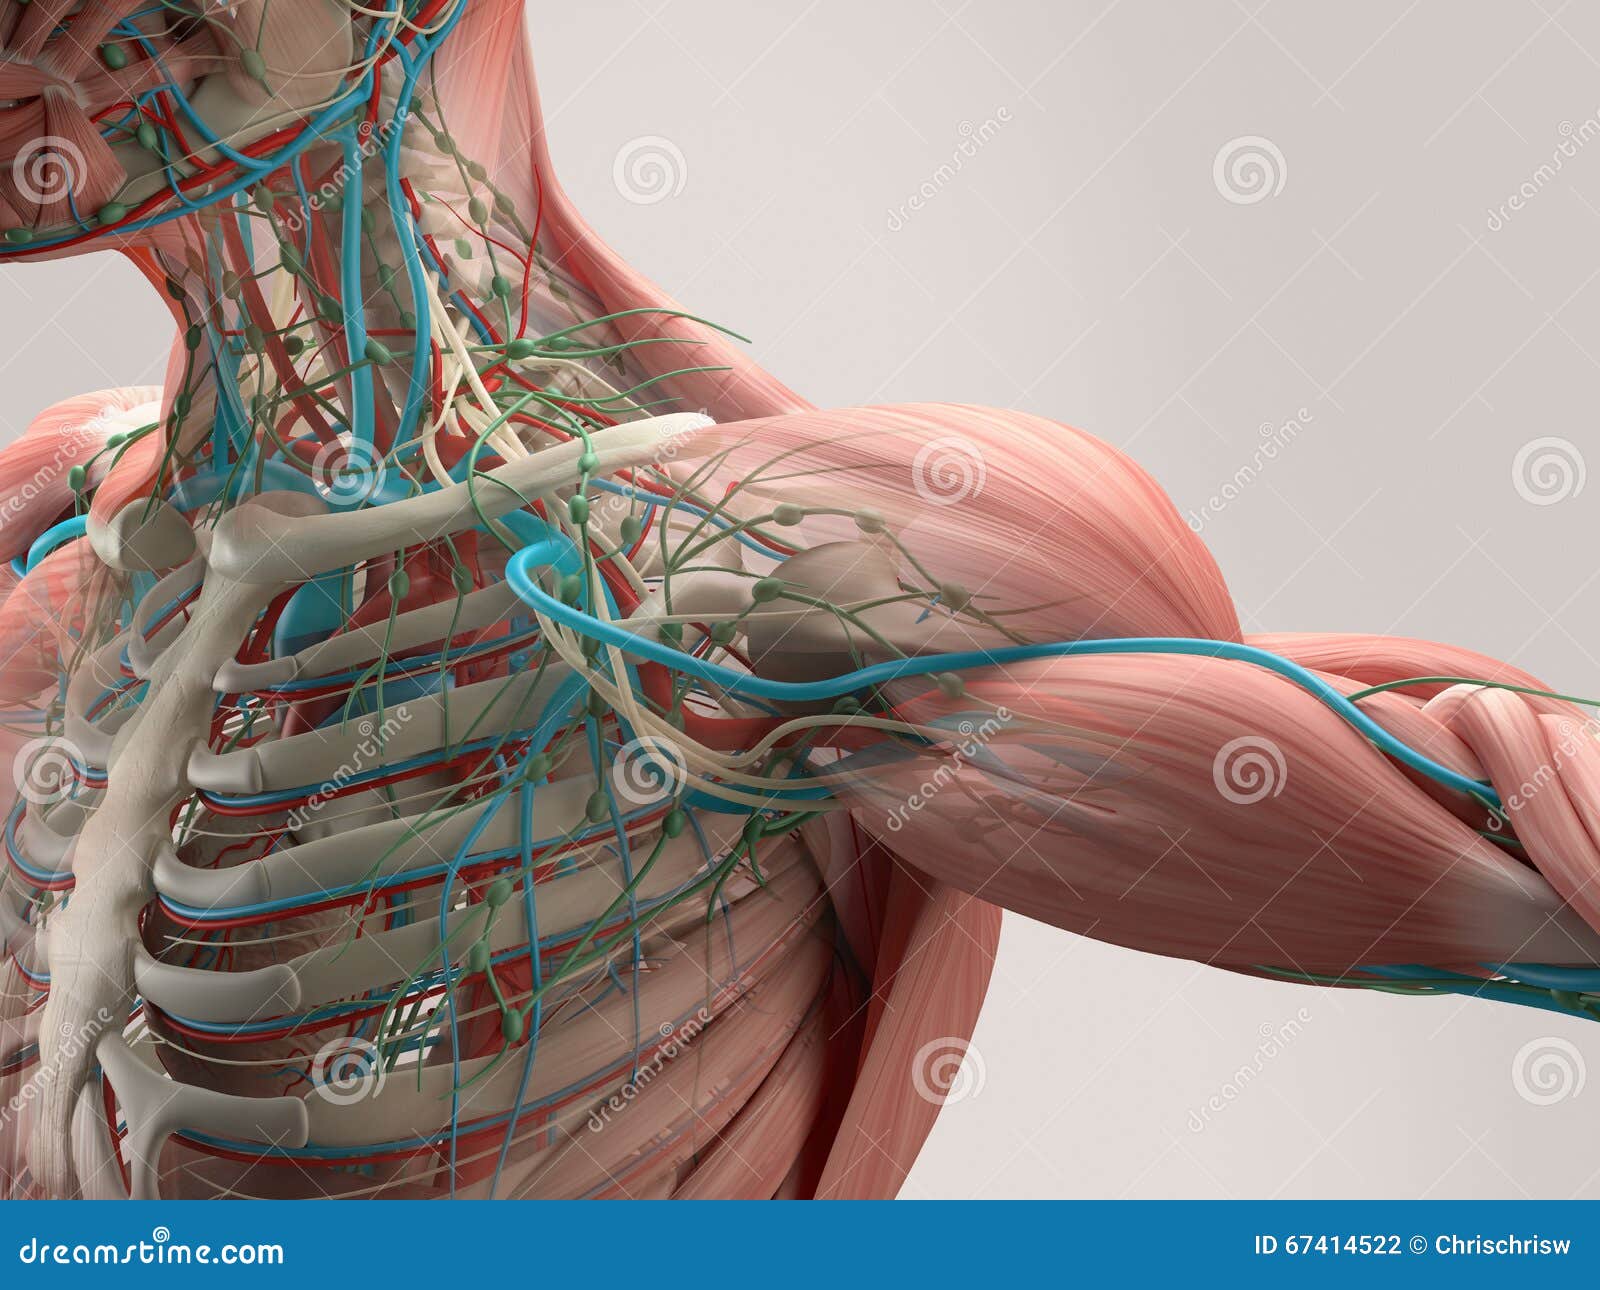 Human Anatomy Chest From Low Angle. Bone Structure. Veins. On Plain